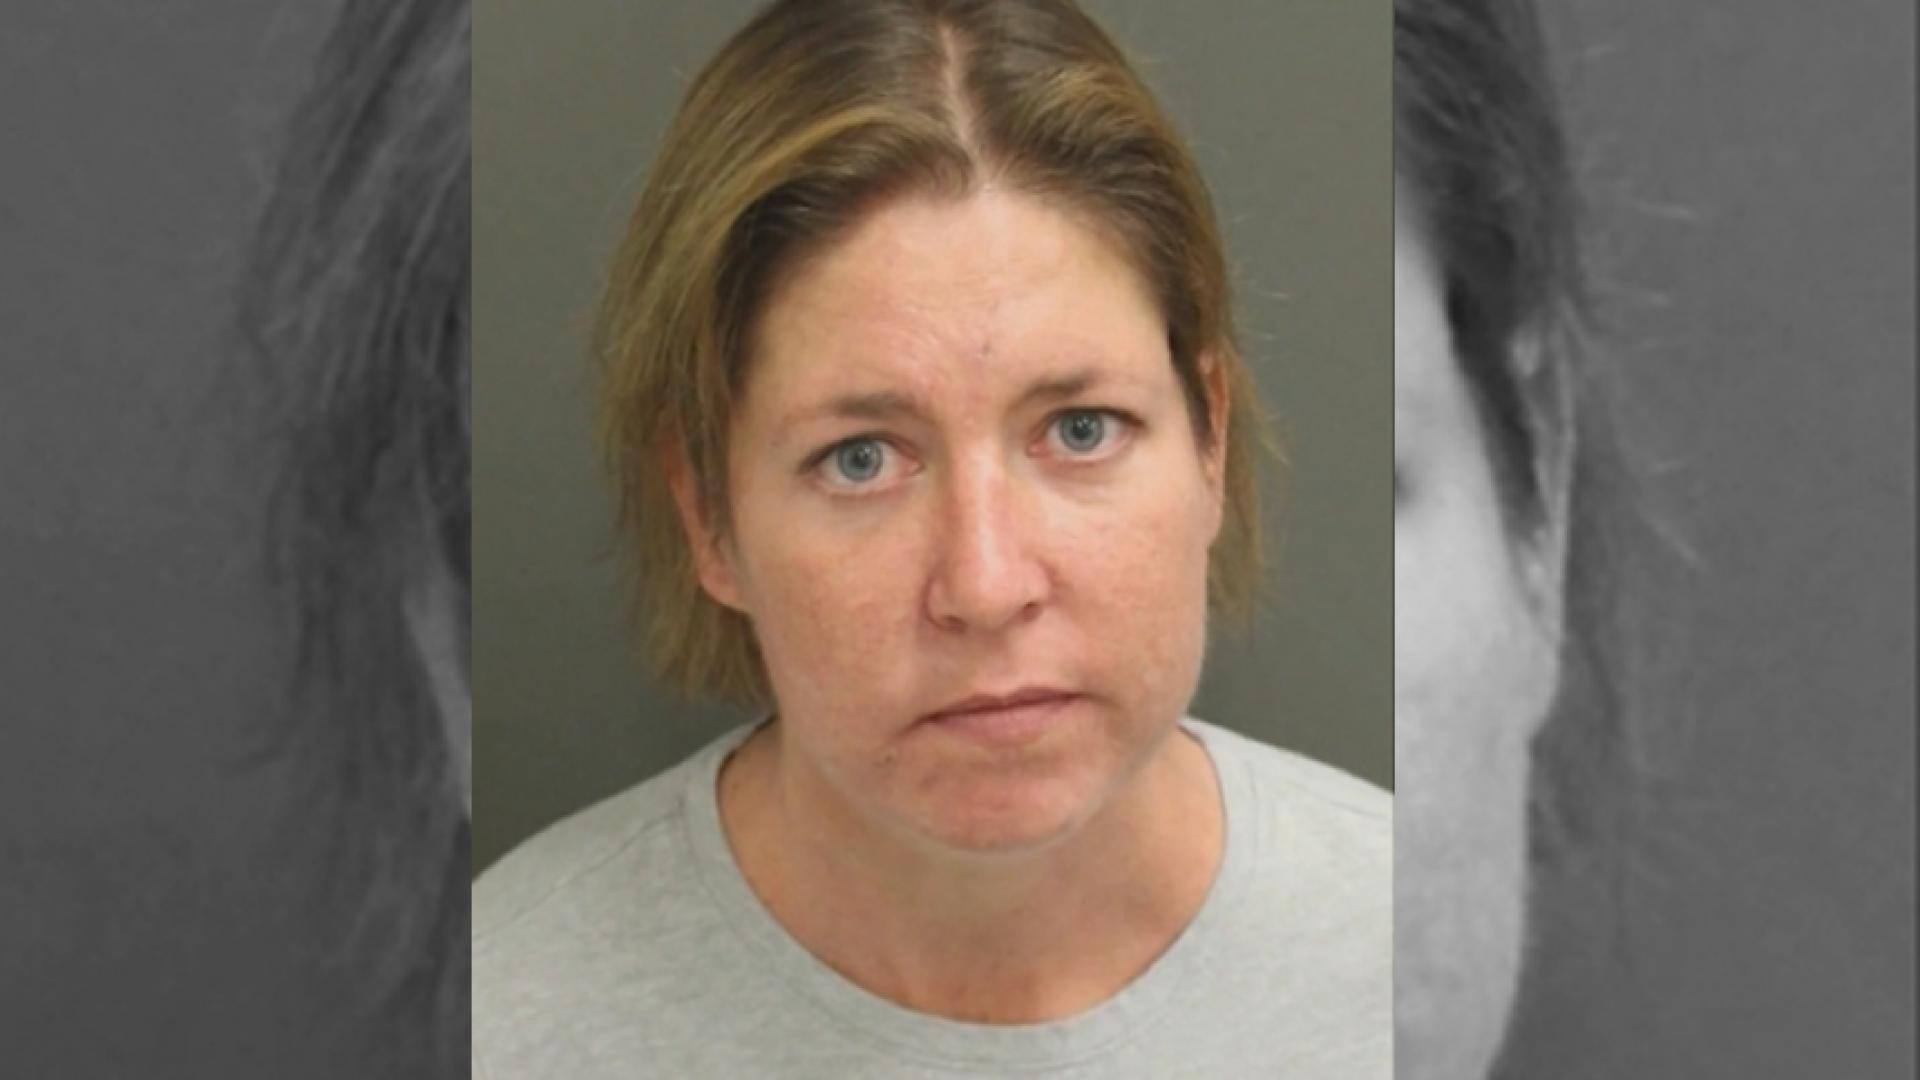 Florida woman accused of zipping man in luggage, leaving him to